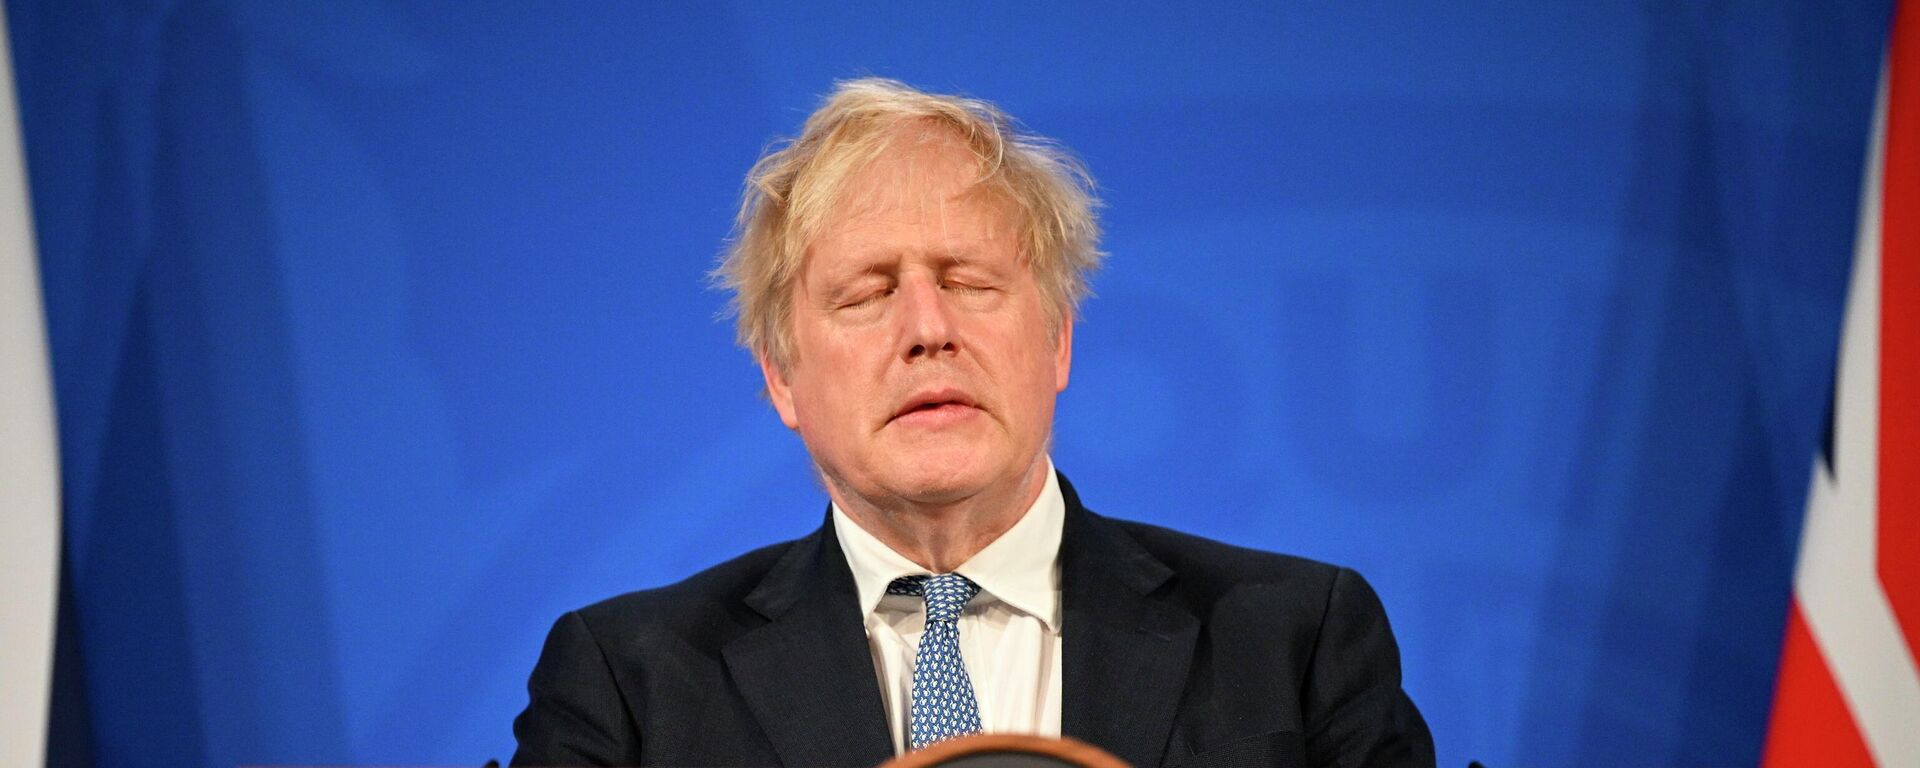 FILE - Britain's Prime Minister Boris Johnson speaks during a press conference in Downing Street, London, Wednesday, May 25 2022, following the publication of Sue Gray's report into Downing Street parties in Whitehall  - Sputnik International, 1920, 24.06.2022